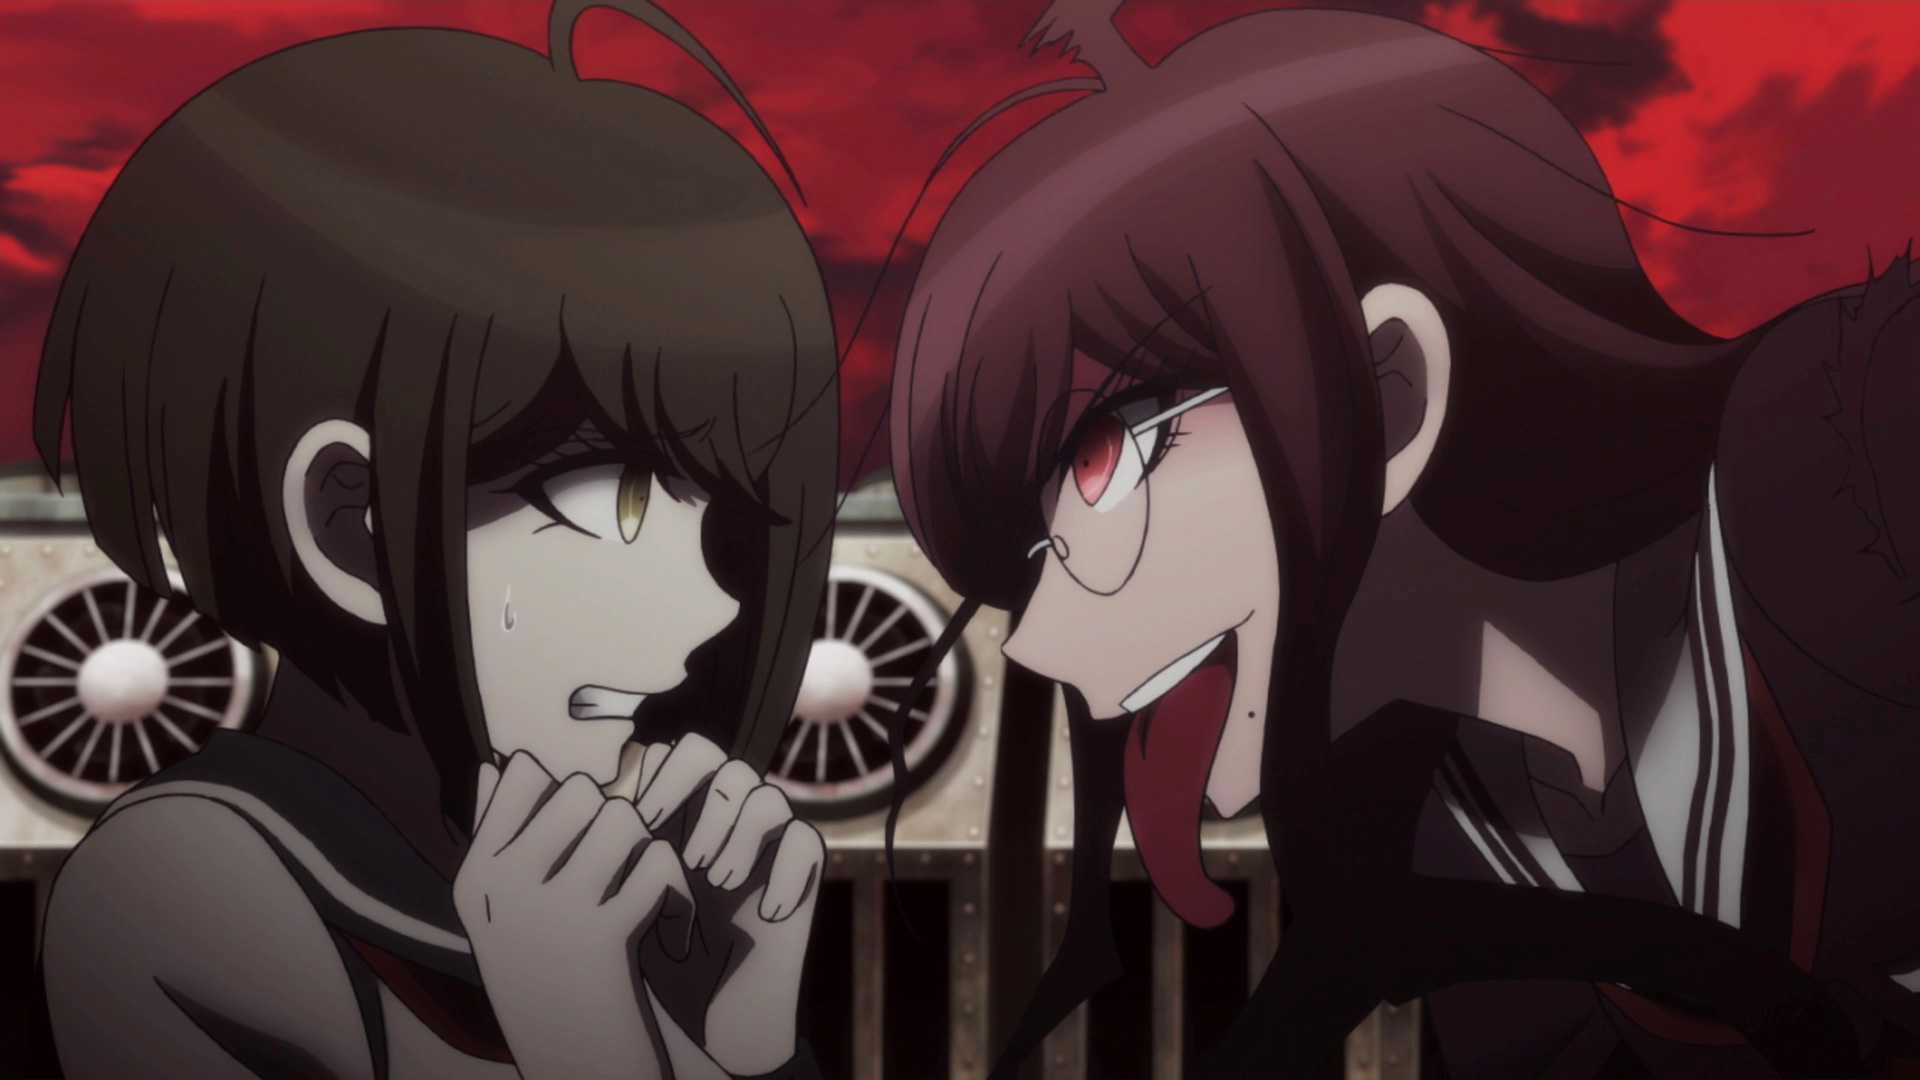 Danganronpa another another despair. Данганронпа another Episode. Danganronpa another Episode: Ultra Despair girls. Данганронпа another Episode Ultra Despair girls. Данганронпа Фукава.